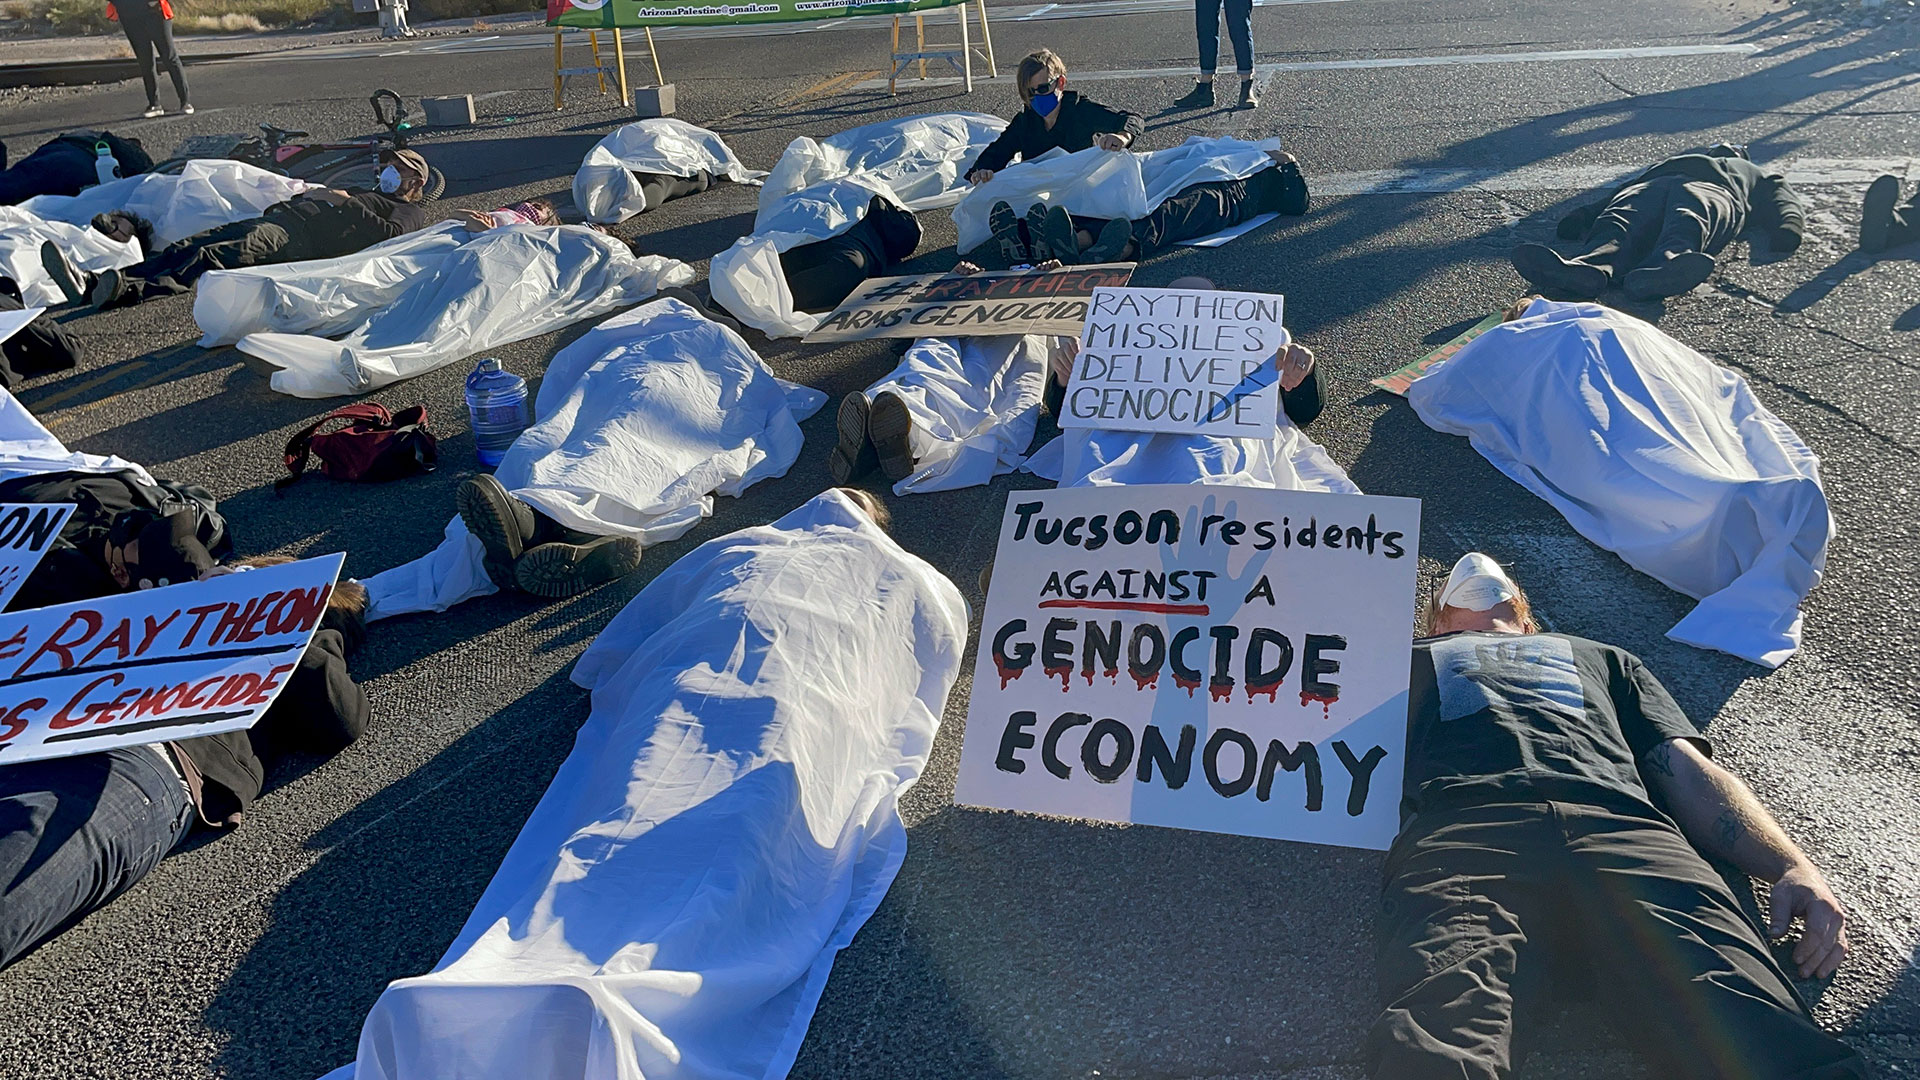 Demonstrators lie on the asphalt to “bring death to Raytheon’s doorstep” in a protest of the company’s (now RTX) weapons sales to Israel. 
